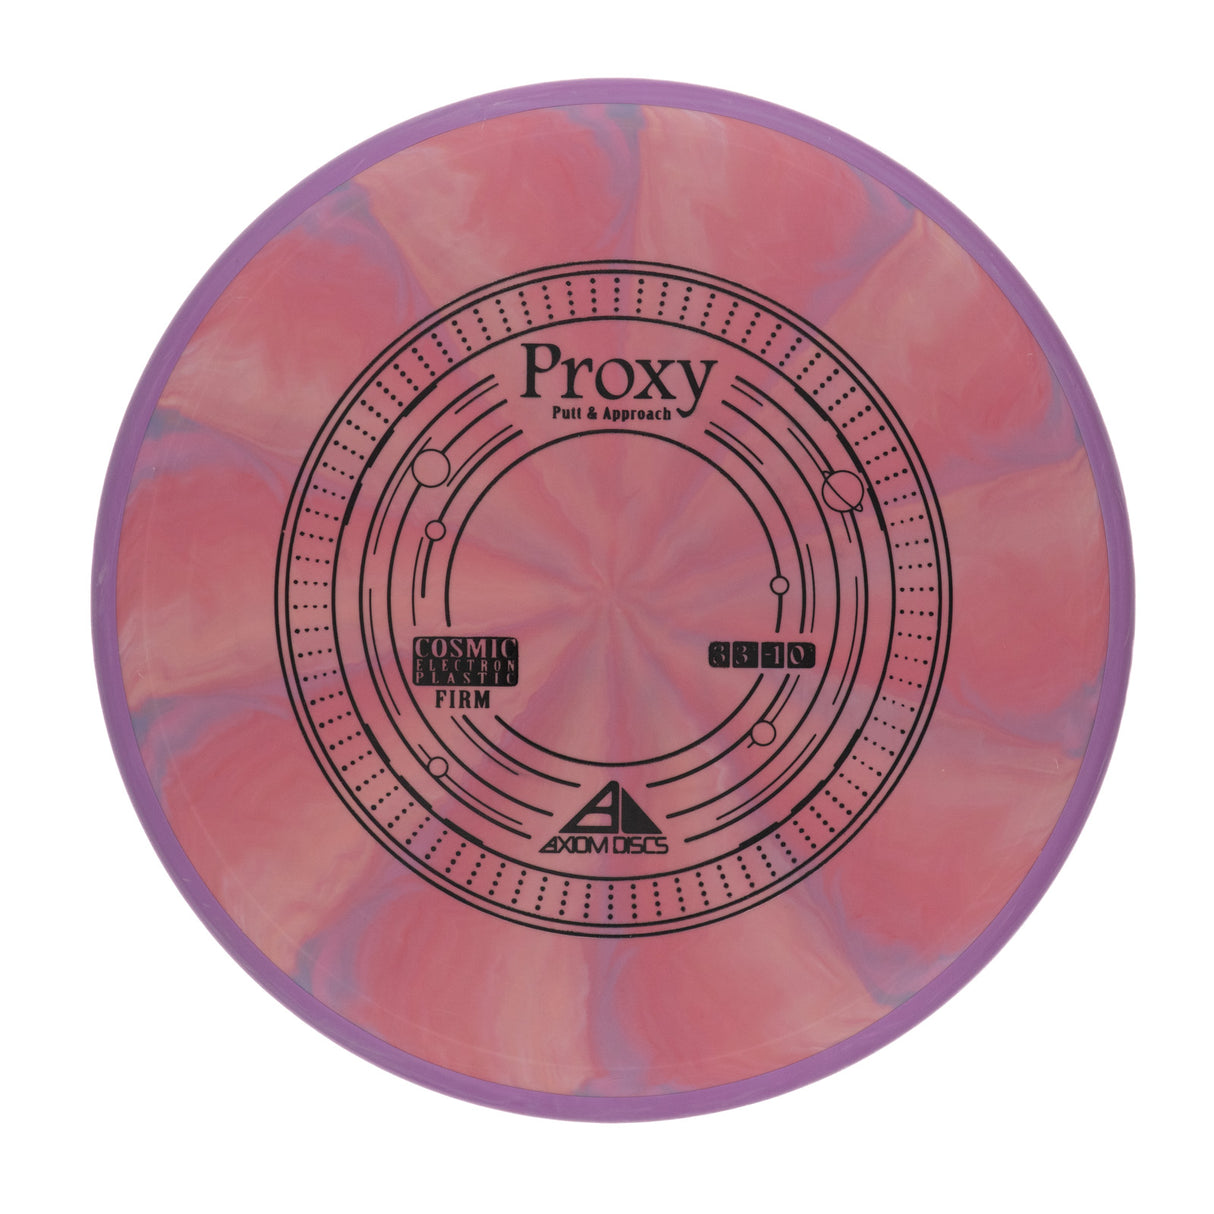 Axiom Proxy - Cosmic Electron Firm 174g | Style 0003